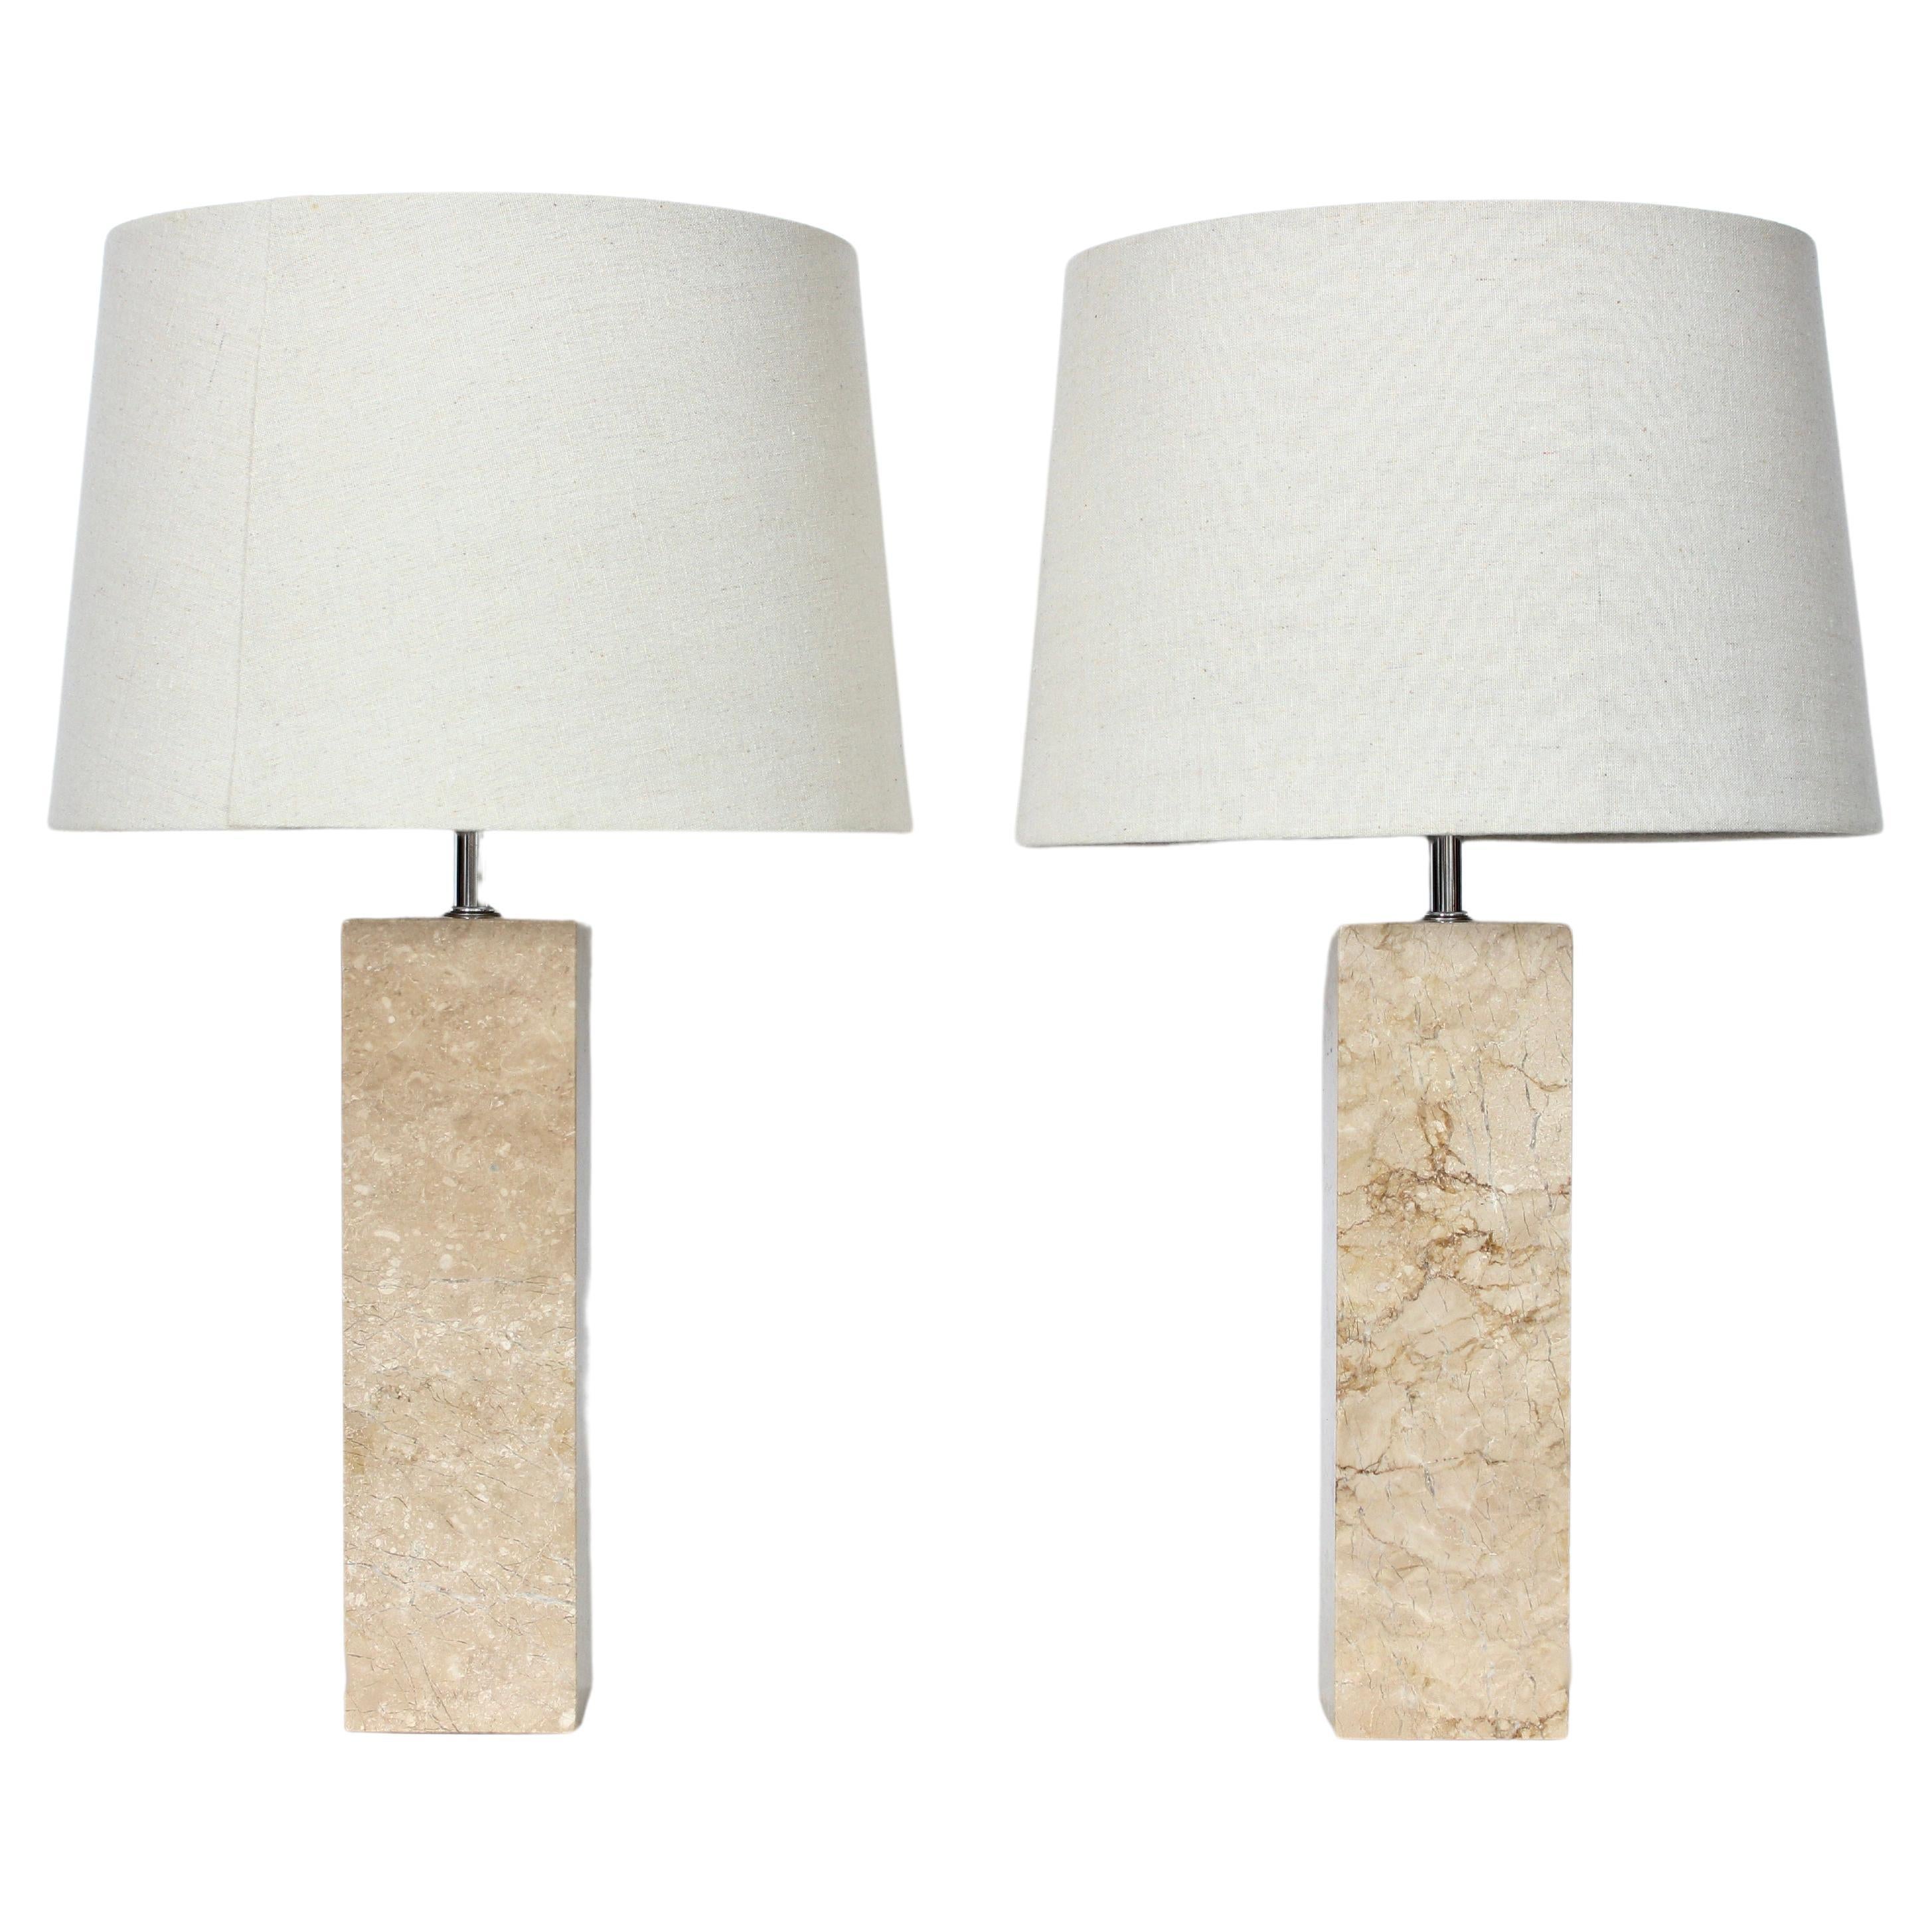 Pair of George Kovacs Beige Solid Travertine Table Lamps, 1970's For Sale